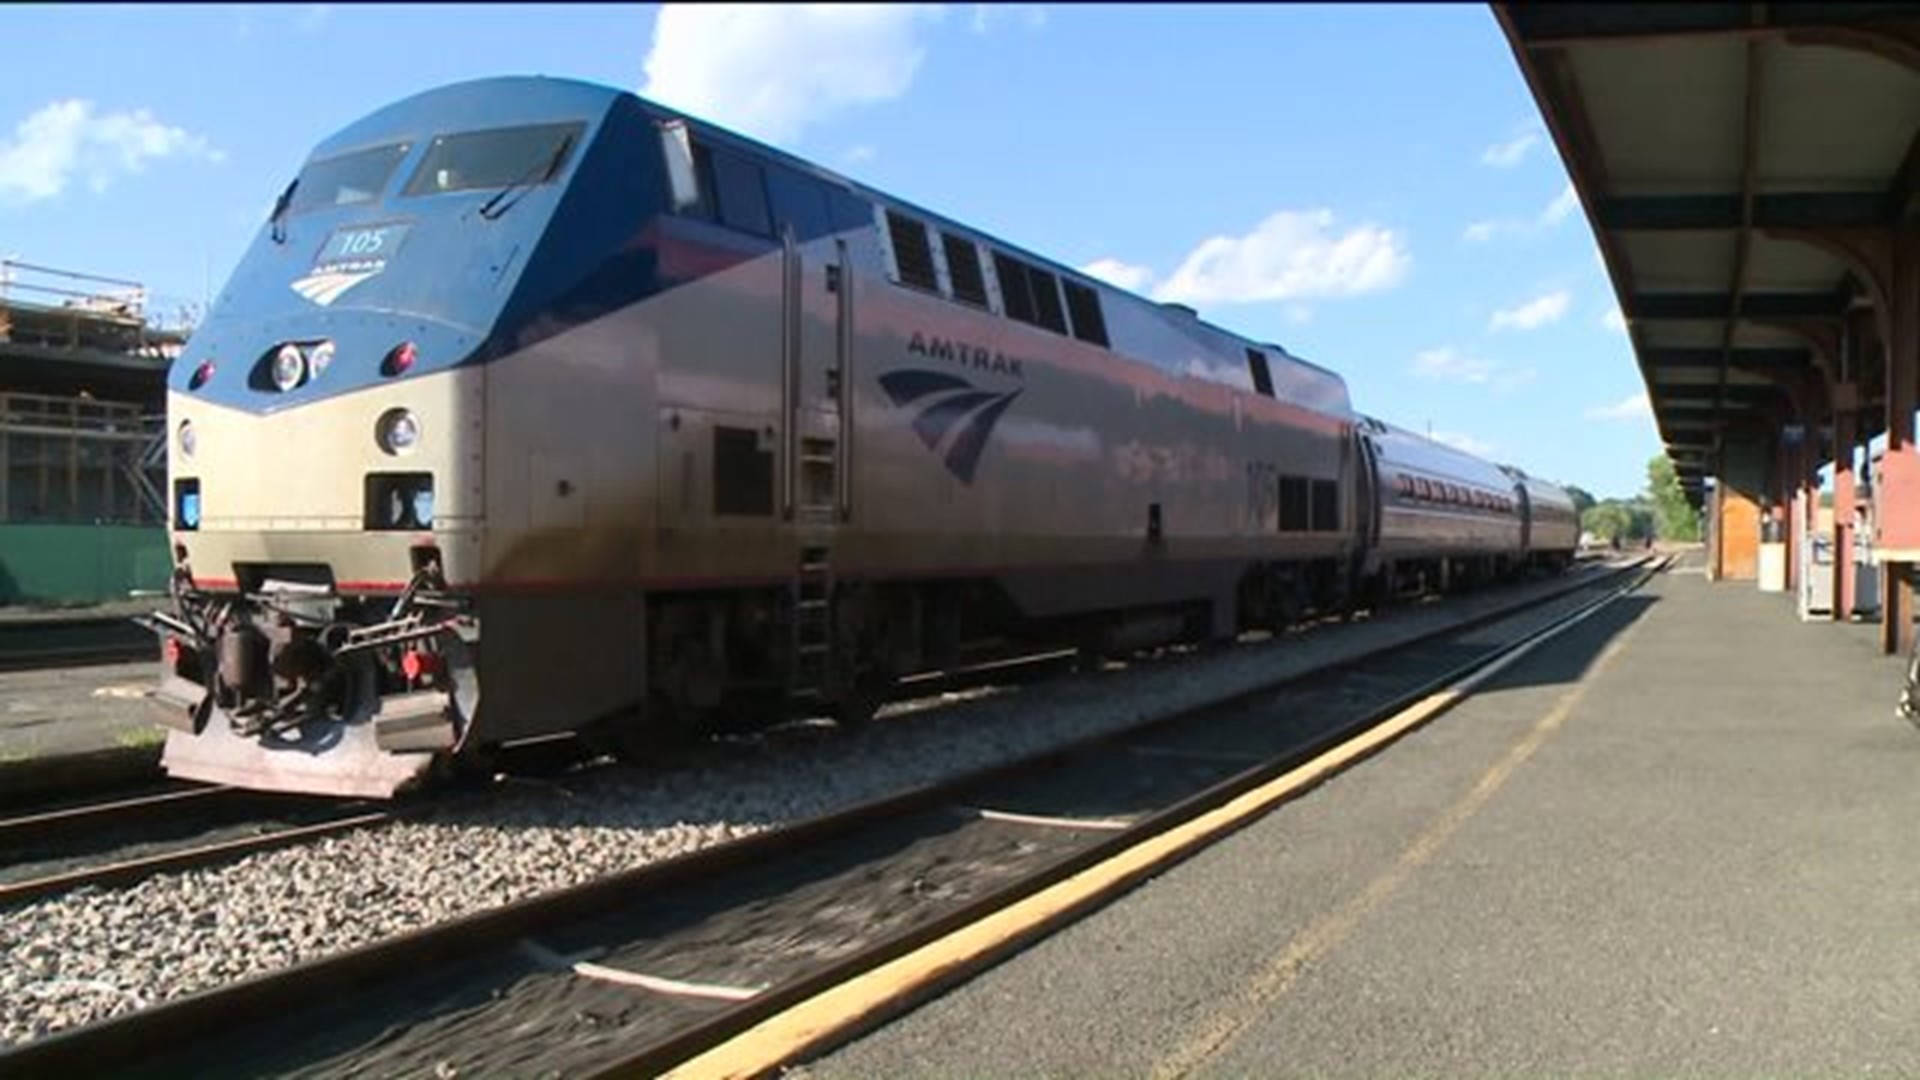 Buses to replace some Amtrak trains